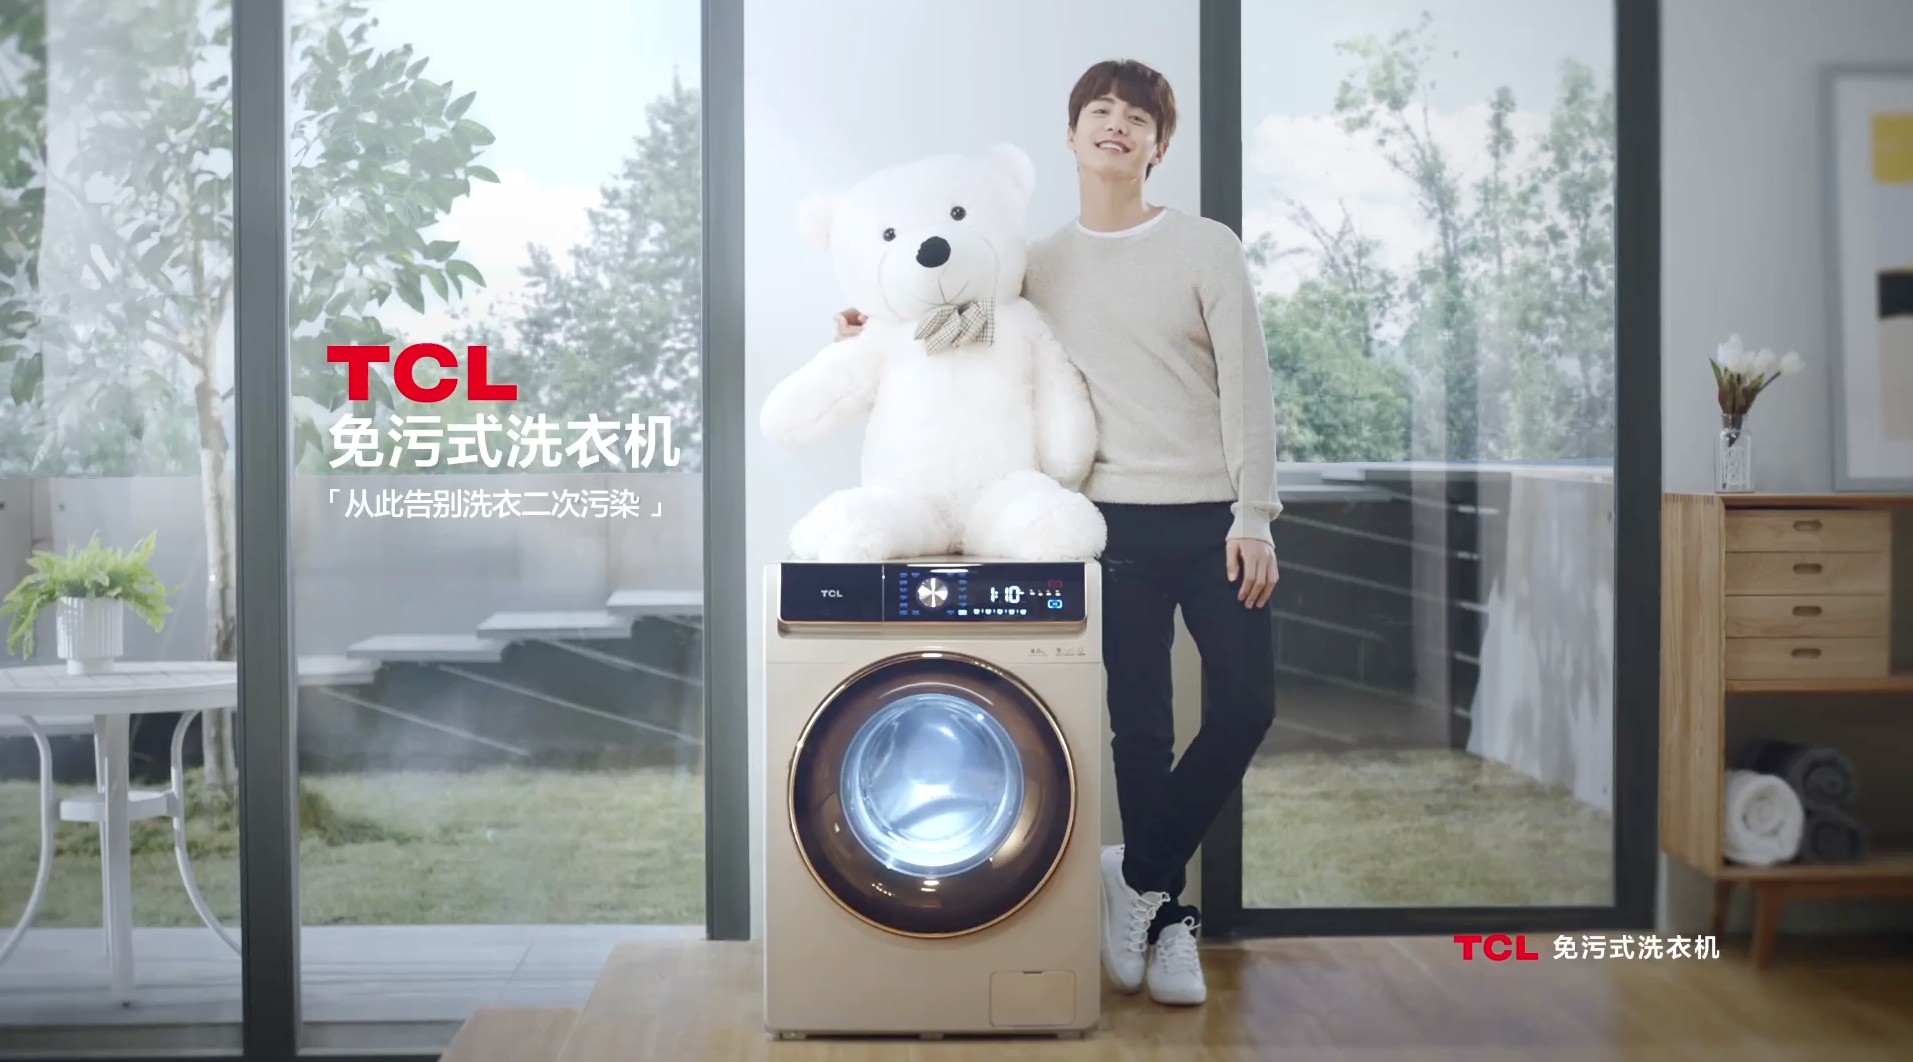 TCL_Washer_15s 